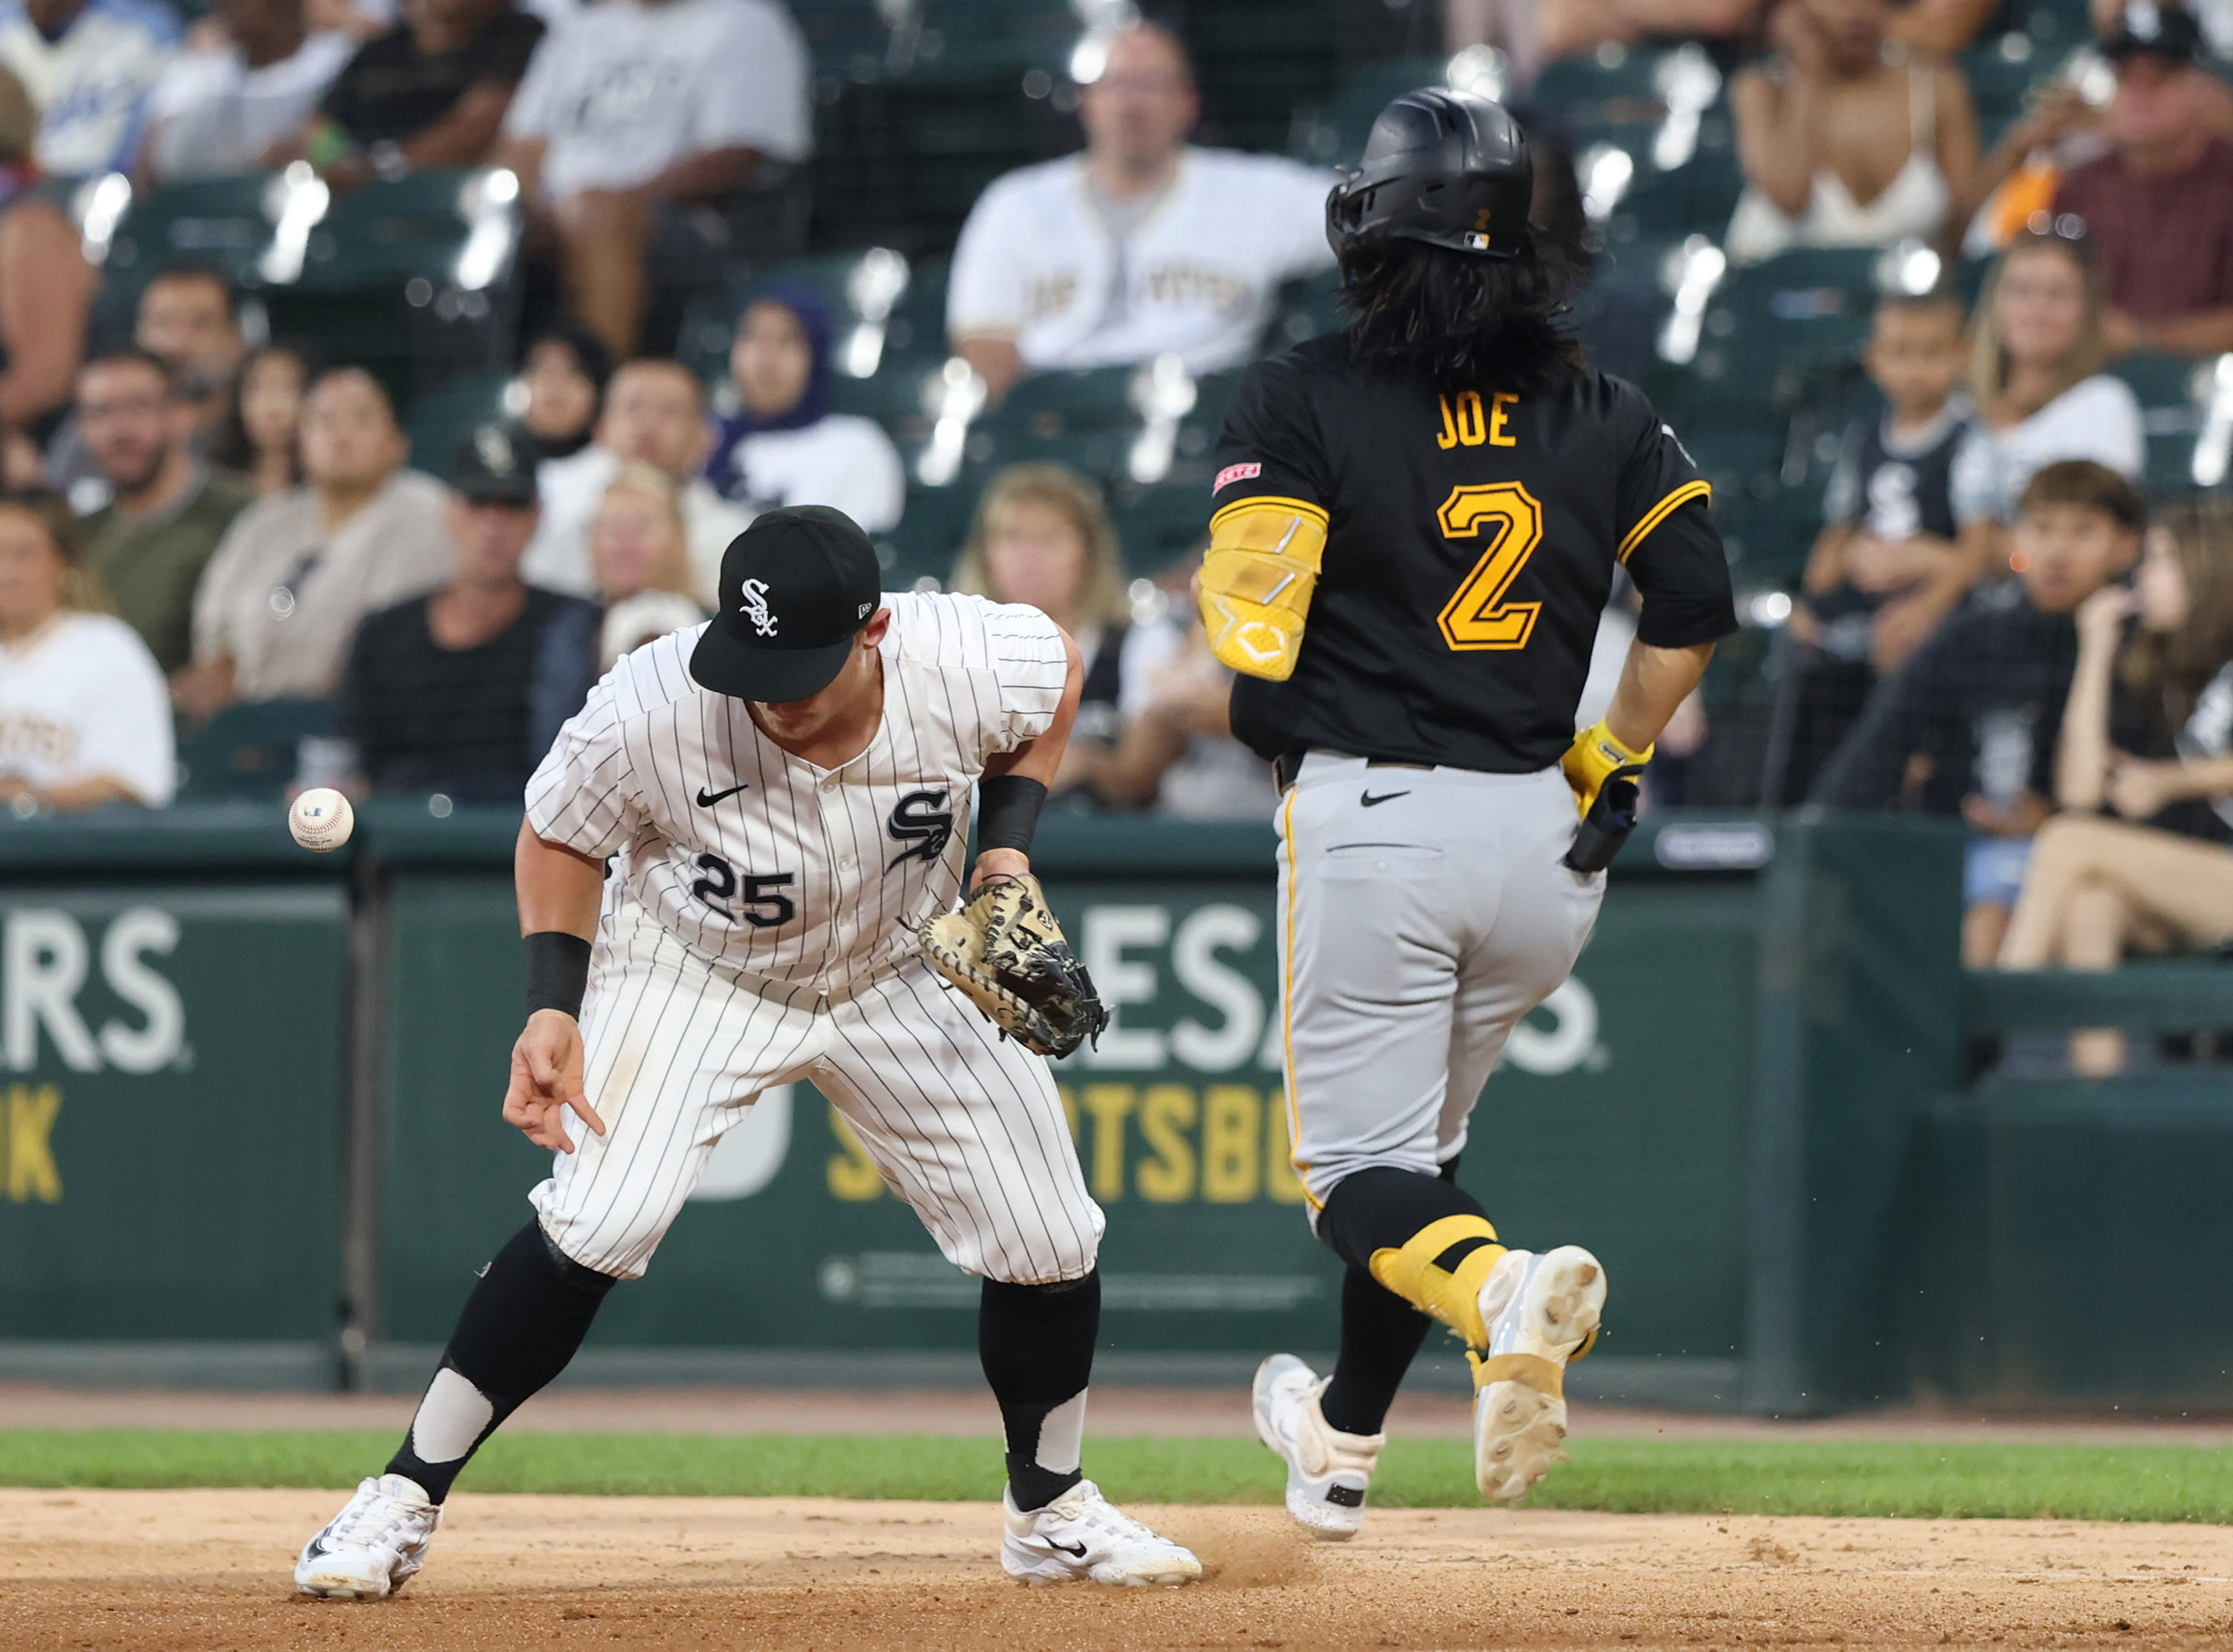 Paul Sullivan: Life goes on, as this historic Chicago White Sox season continues marching backward